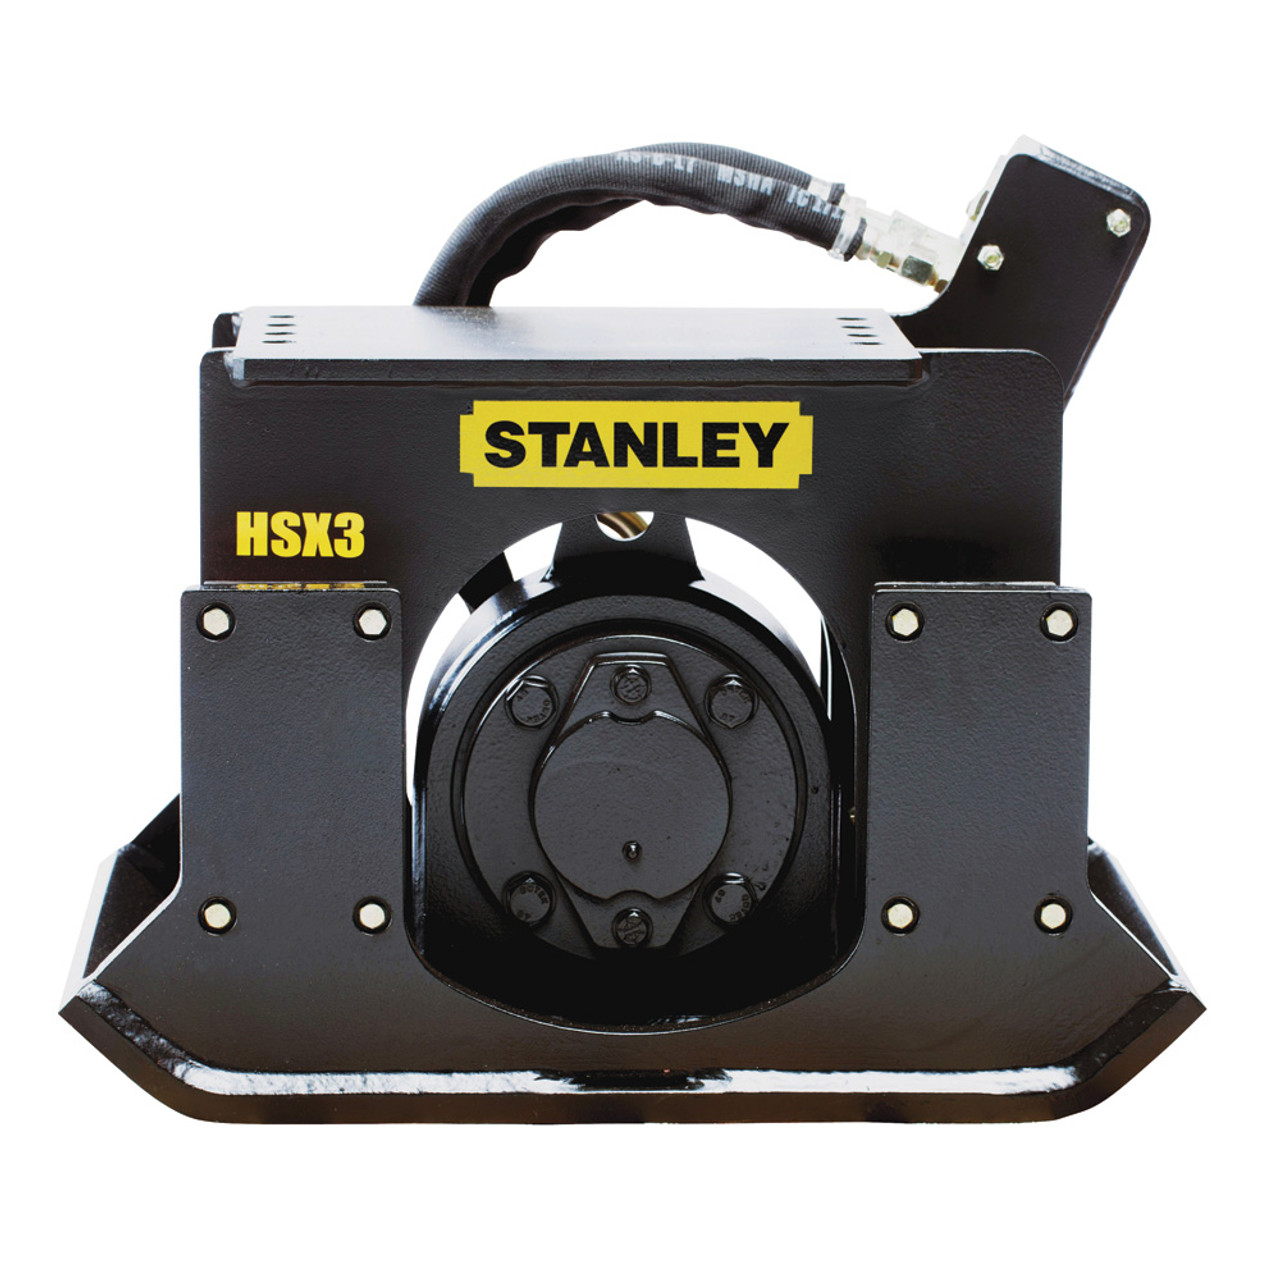 Stanley Excavator Mounted Vibratory Plate Compactor